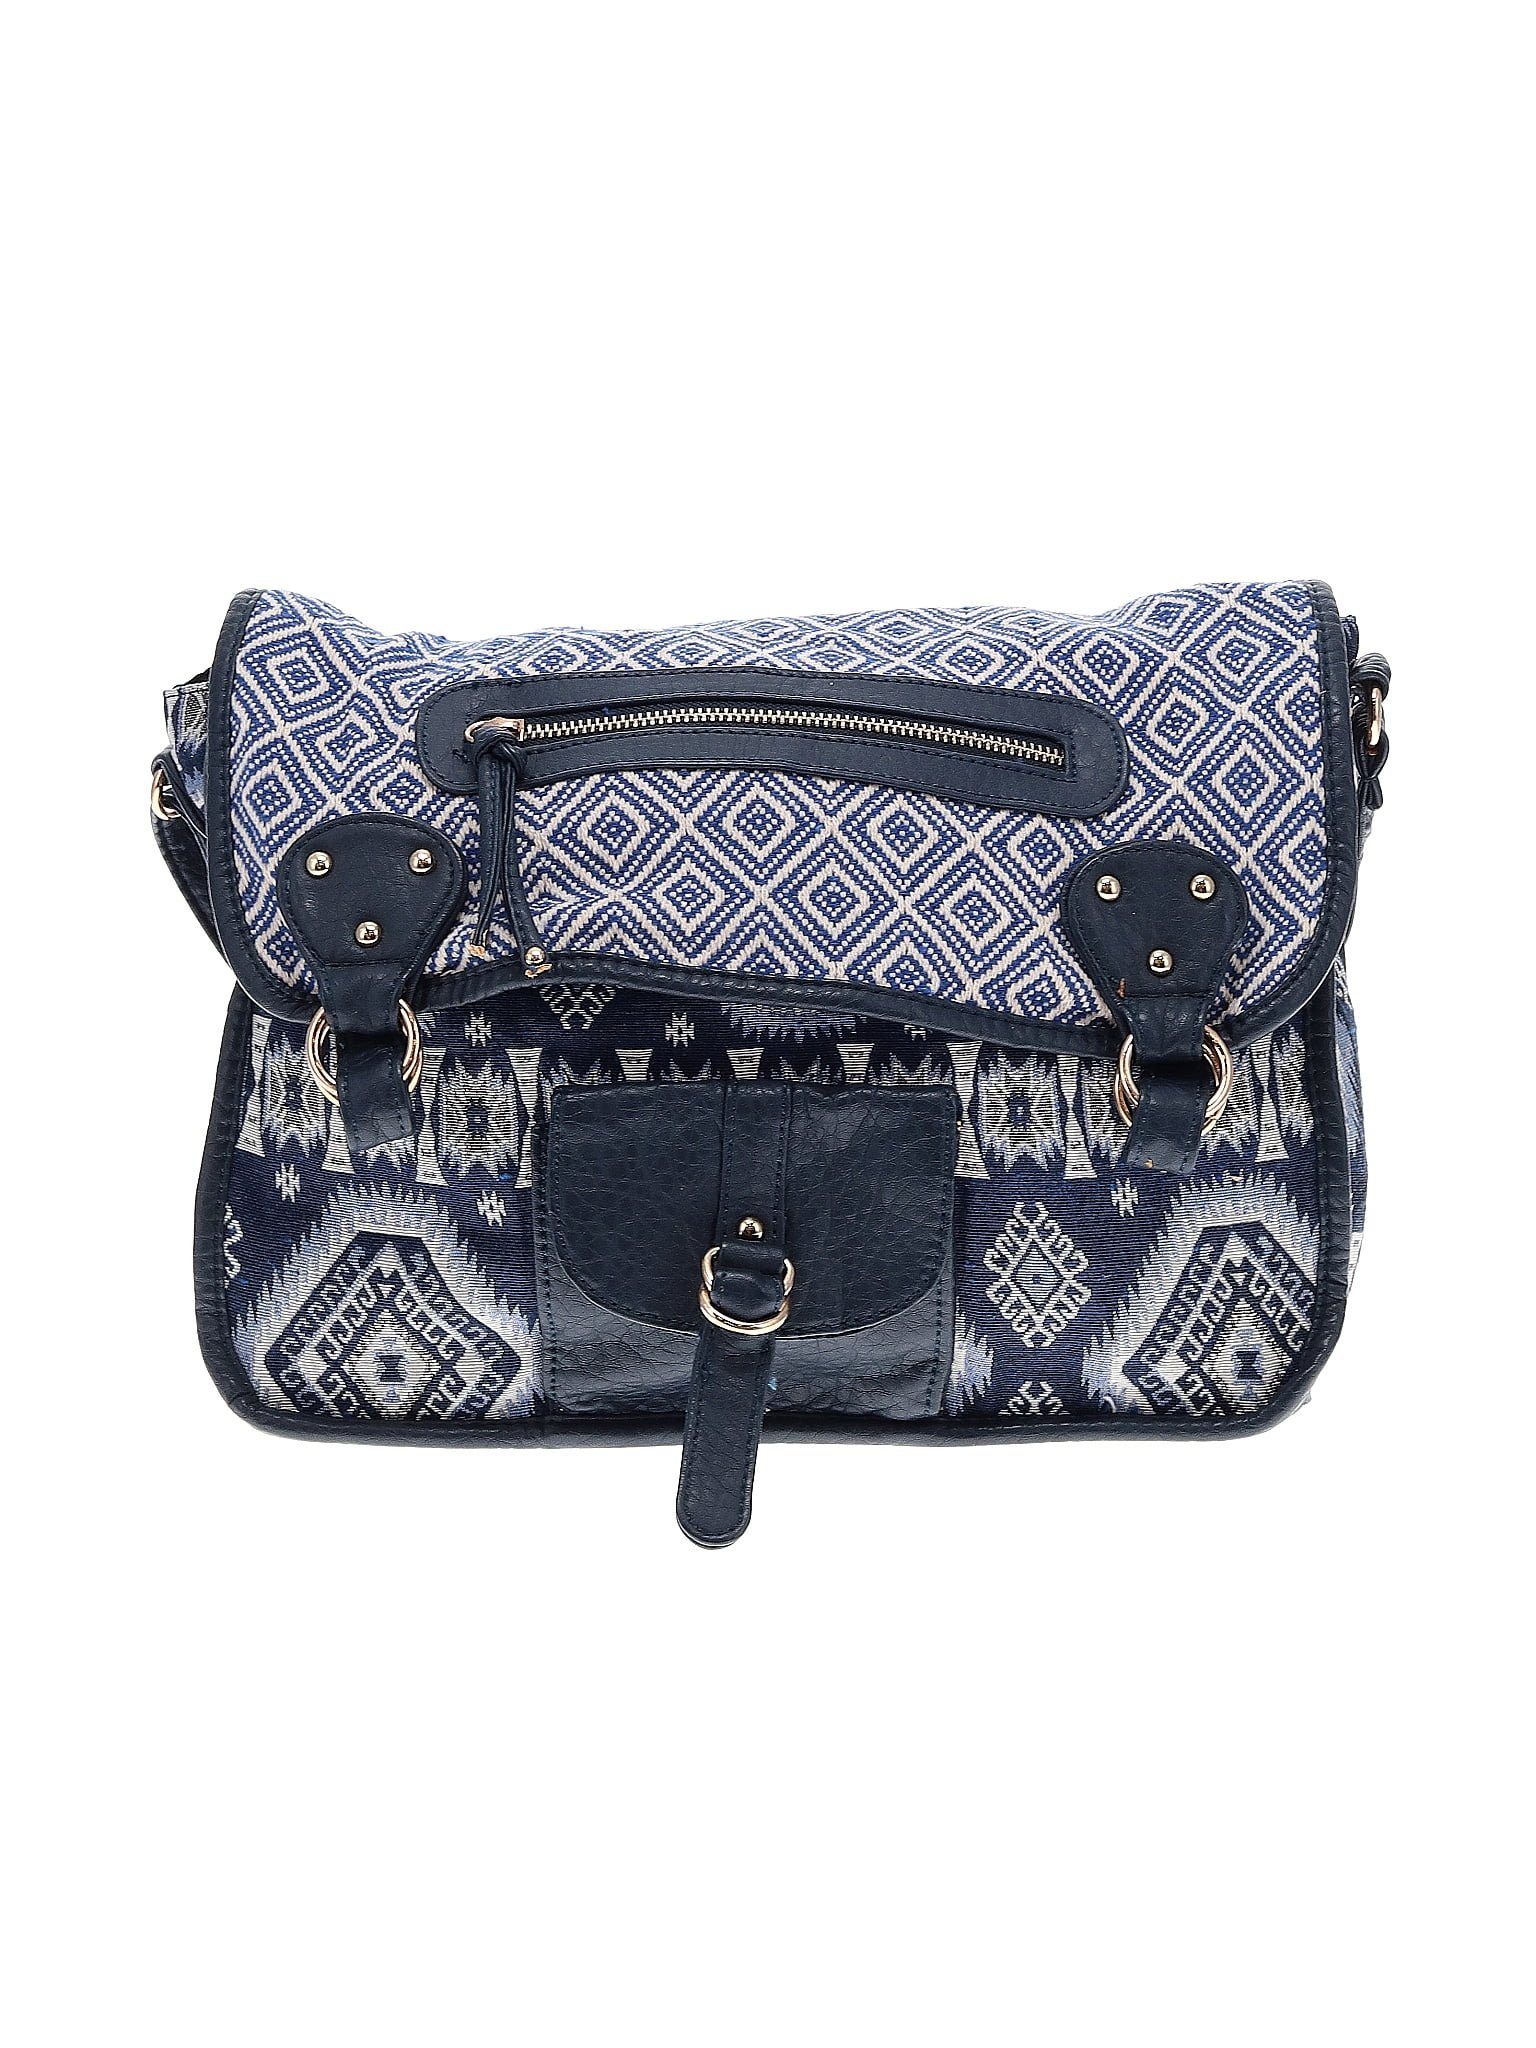 Under One Sky Handbags On Sale Up To 90% Off Retail